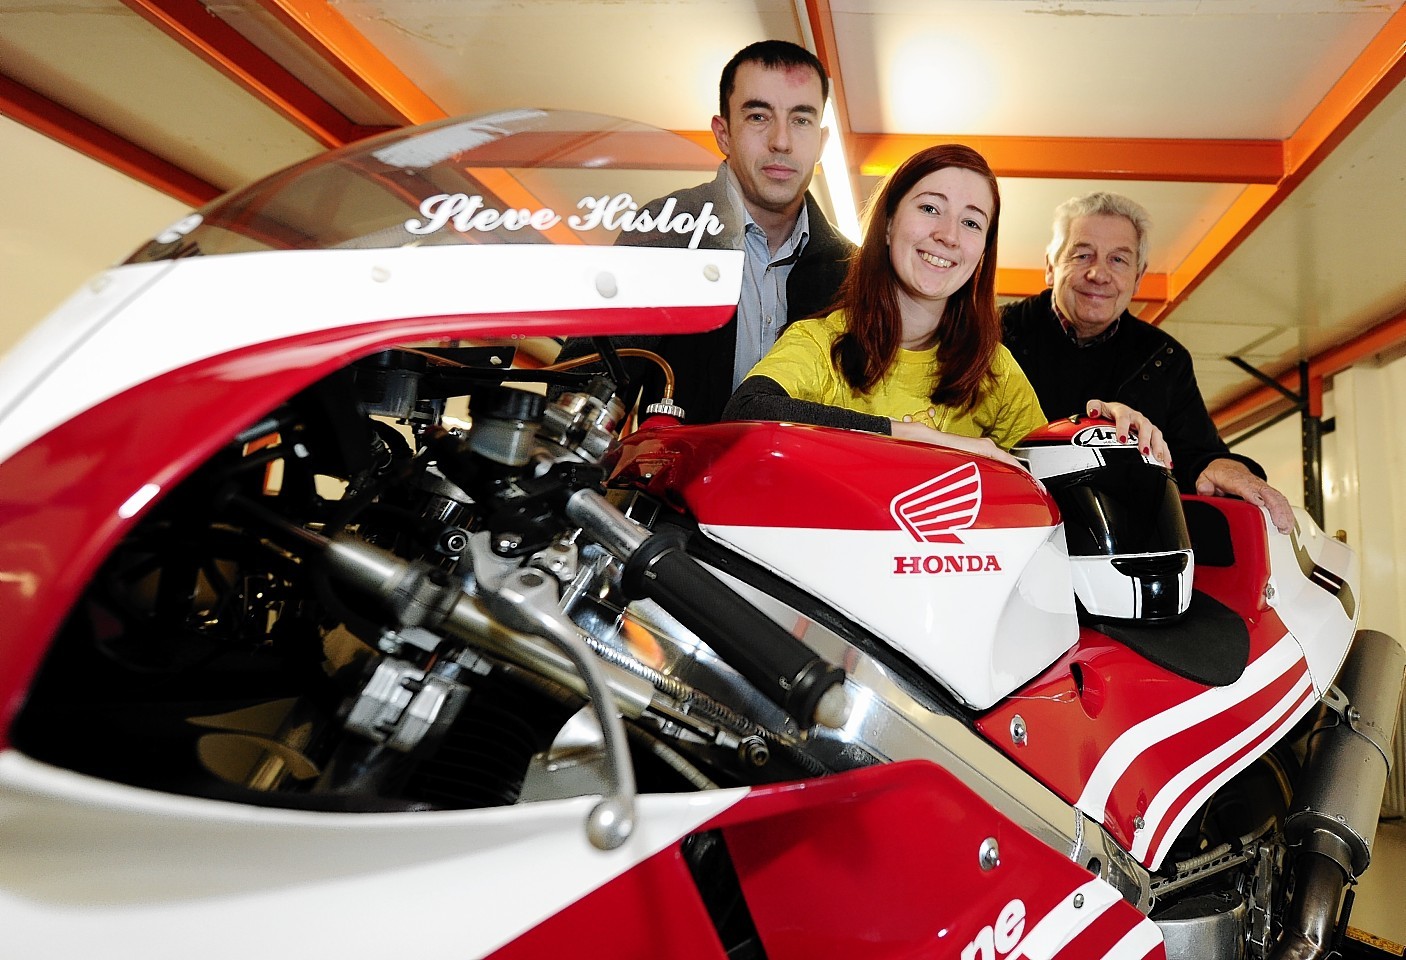 From left to right: Andy Freeman event organiser, Archie Fundraising manager Emma Slesser and Sandy Dalgarno (owner of the bike) with the 1989 Steve Hislop TT winning Honda RC30 which will be on display at the event.